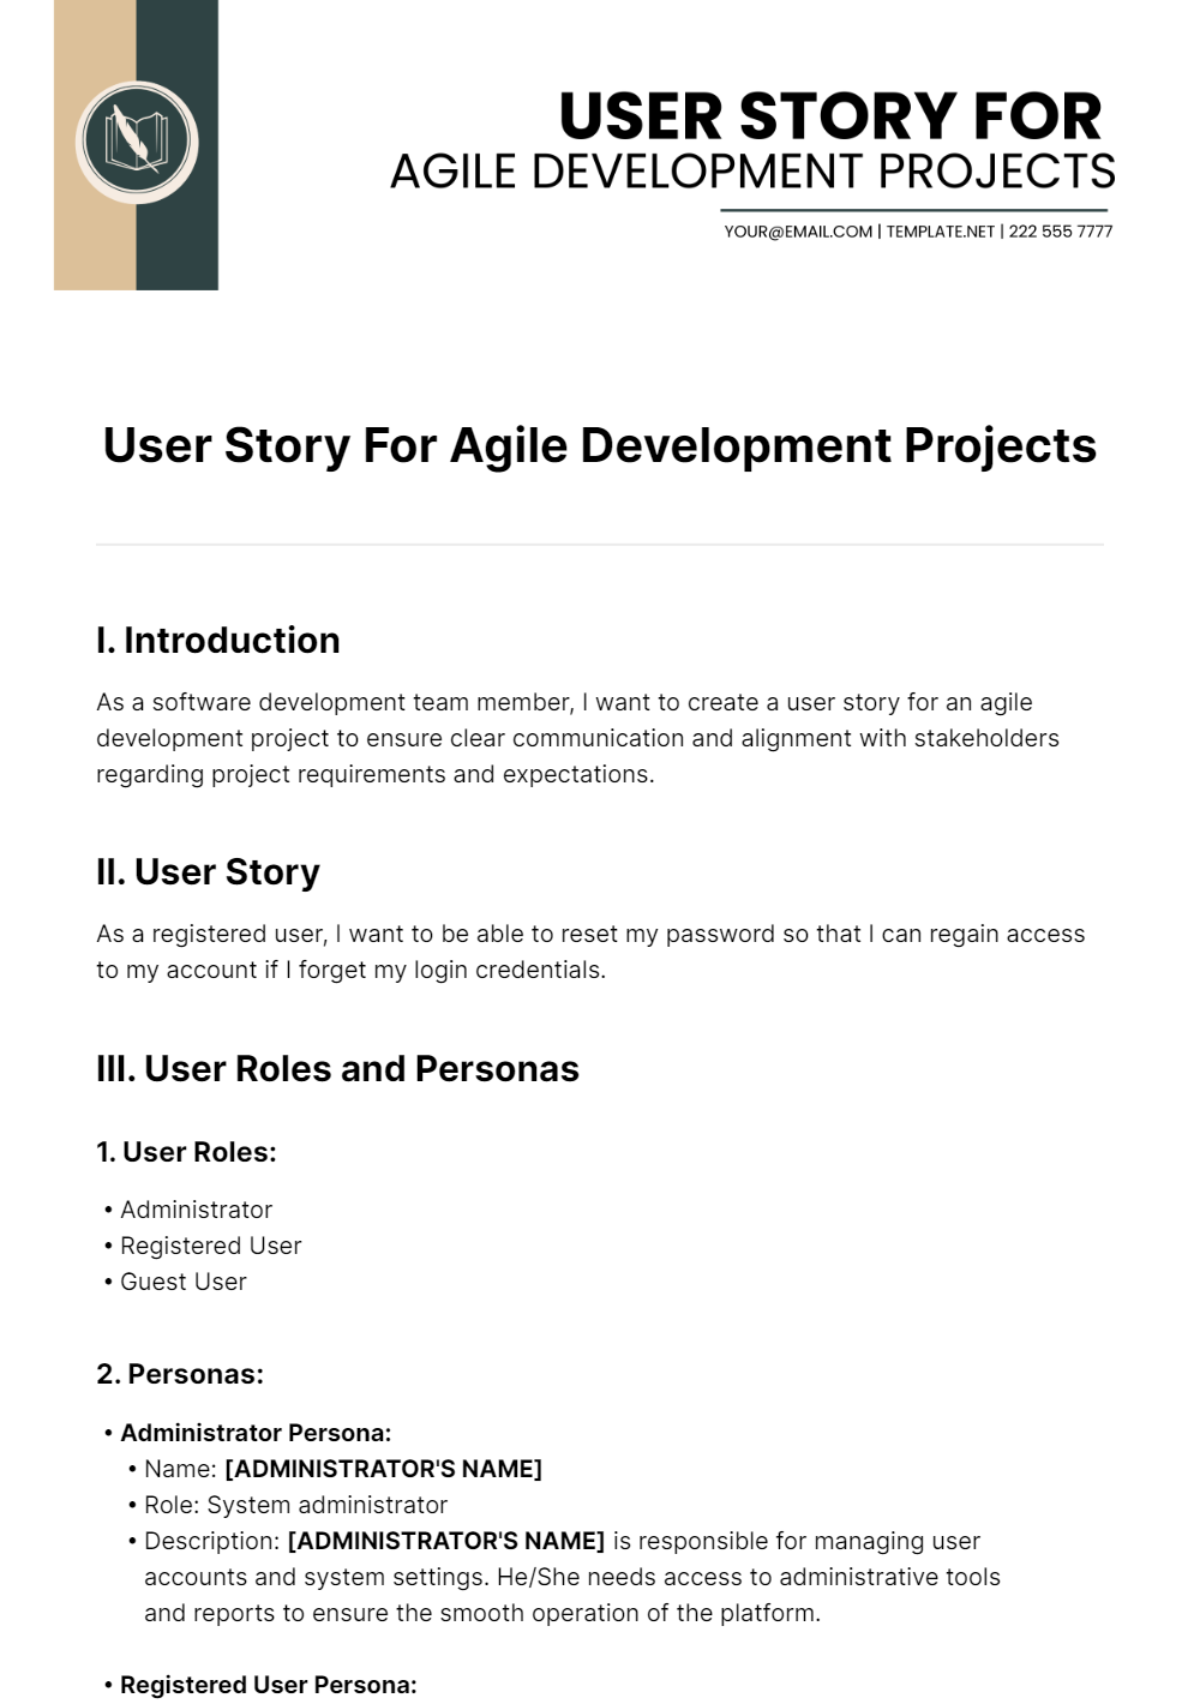 User Story For Agile Development Projects Template